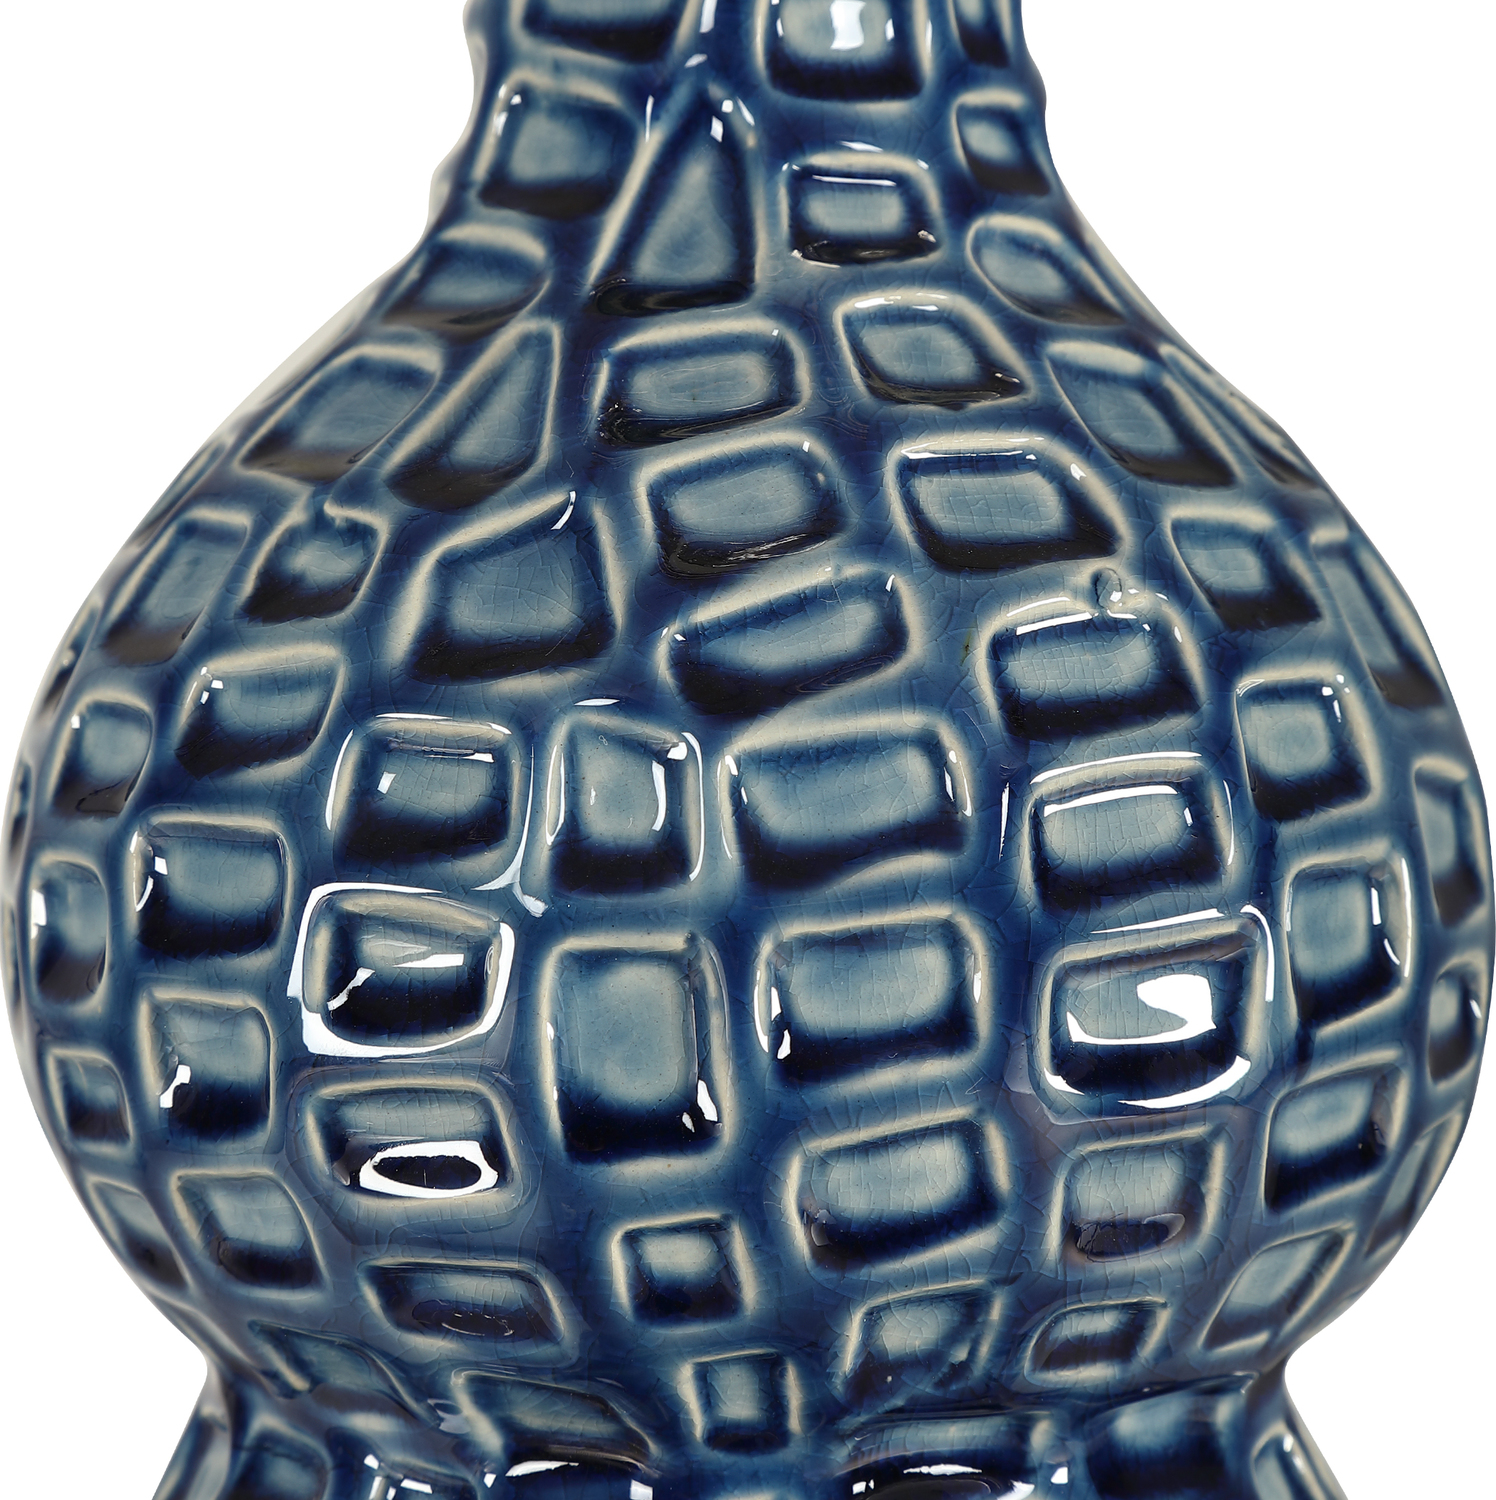 Uttermost Cobalt Blue Table Lamp Table Lamps Based On Mid-century Modern Designs, This Ceramic Table Lamp Features A Curved Base With Carved Geometric Details Finished In A Deep Cobalt Blue Glaze With Brushed Nickel Accents.